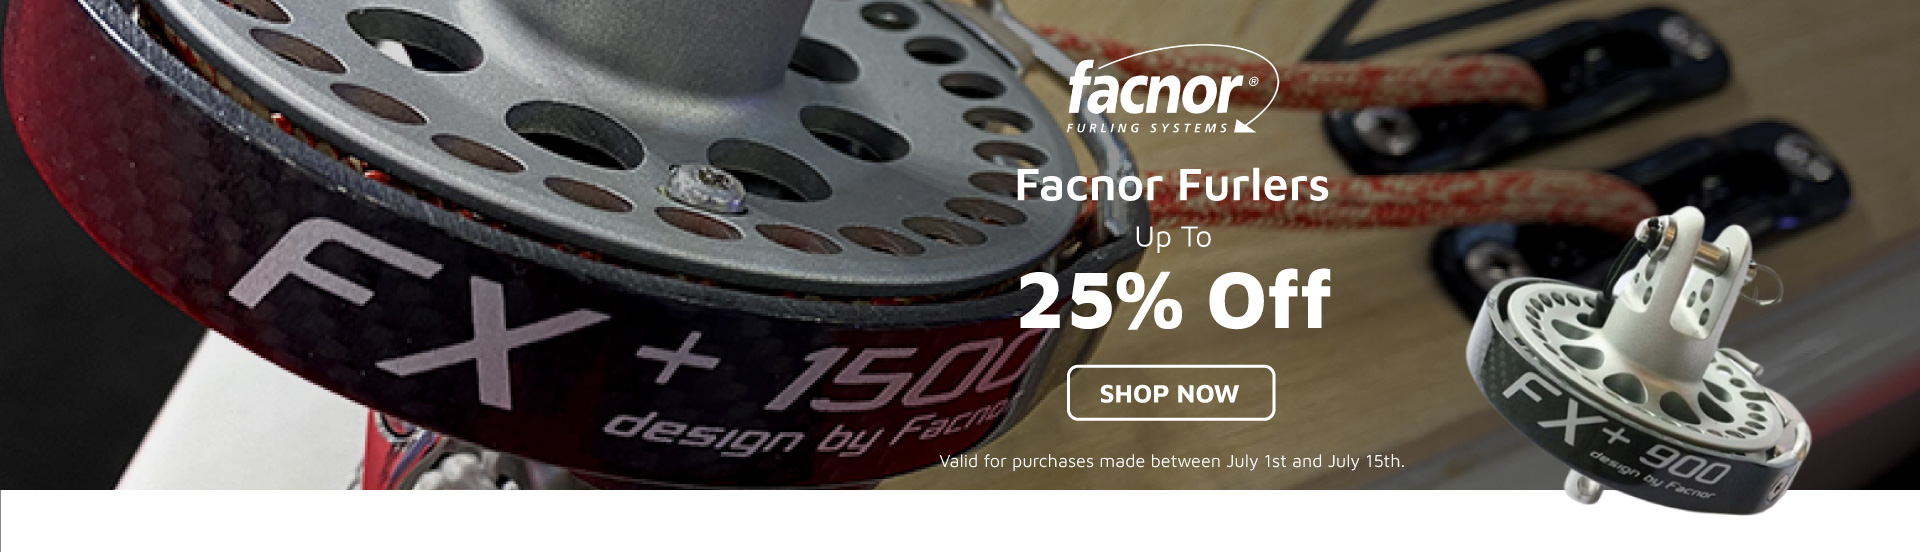 Facnor Furlers up to 25% off